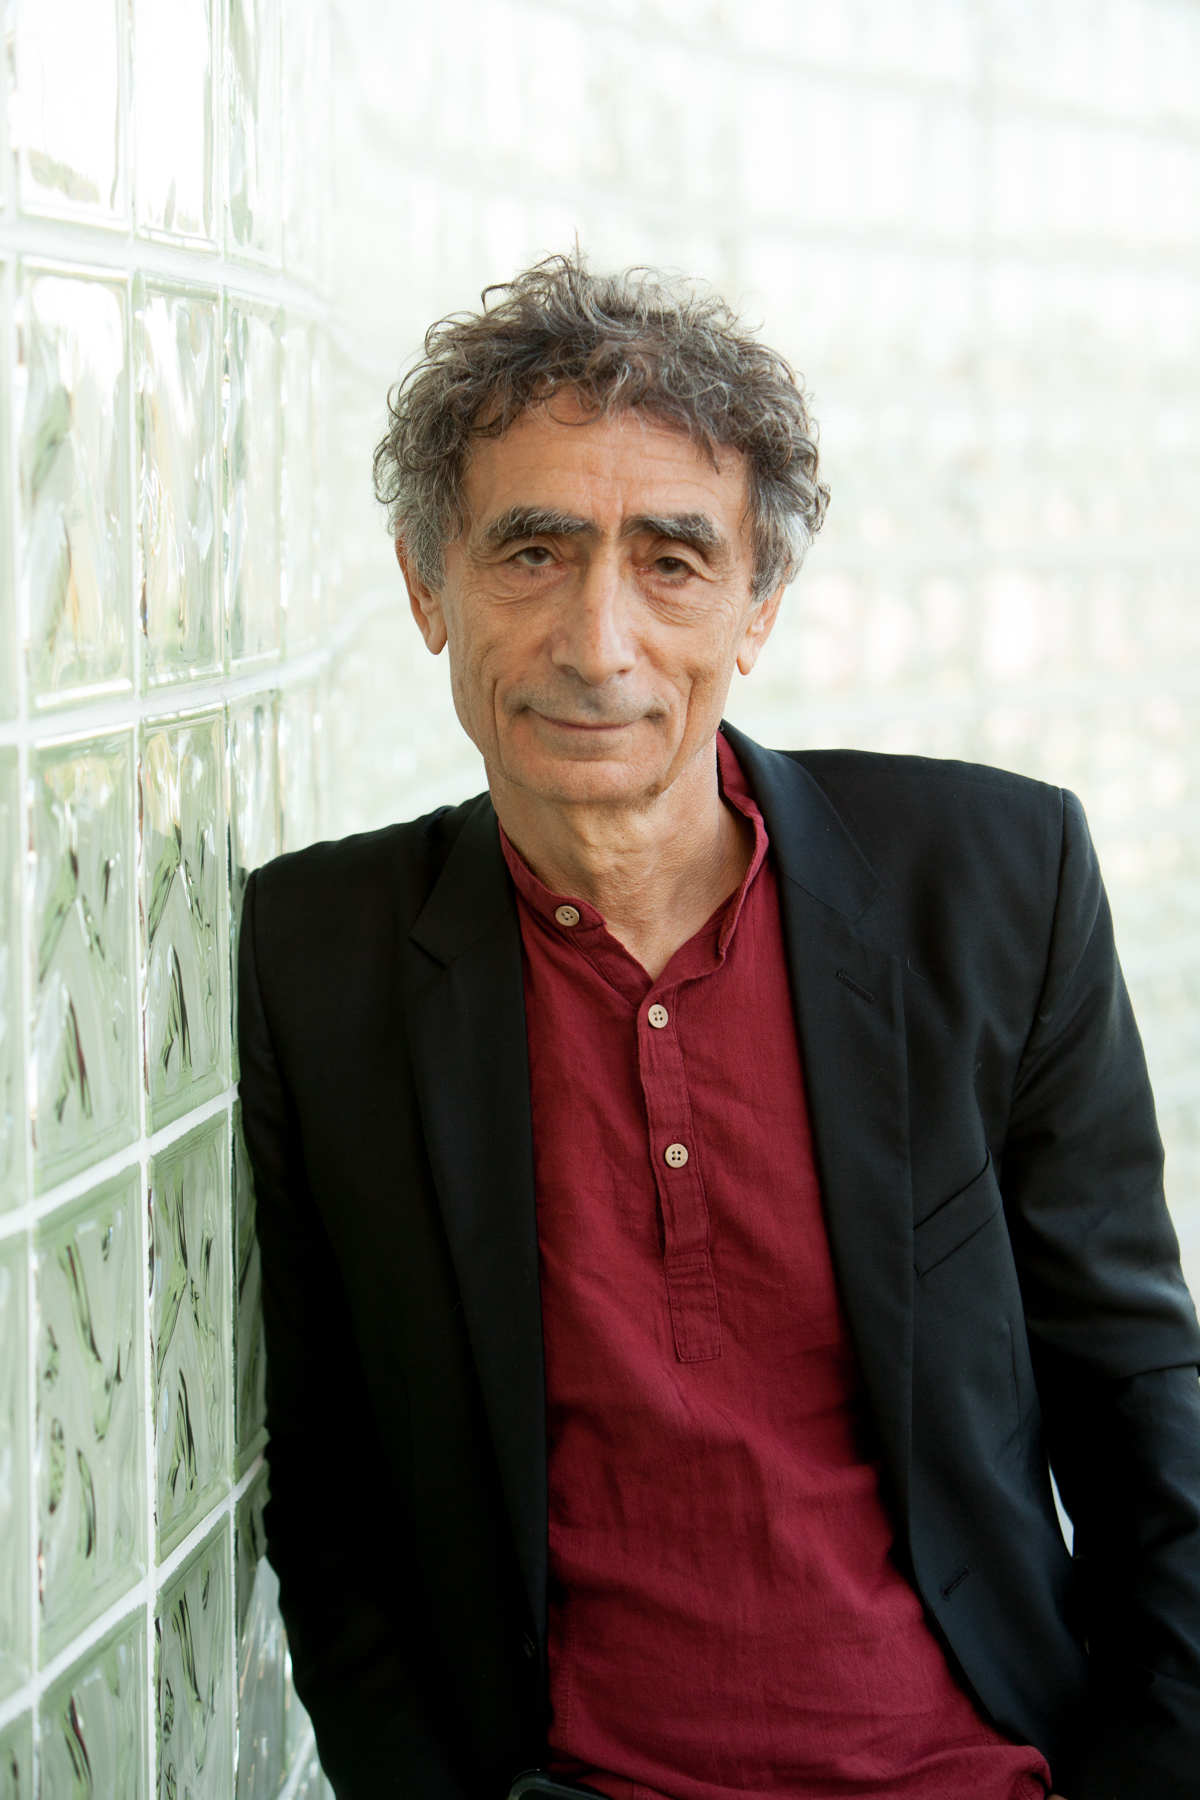 Dr. Gabor Mate’s Compassionate Approach to Addictions